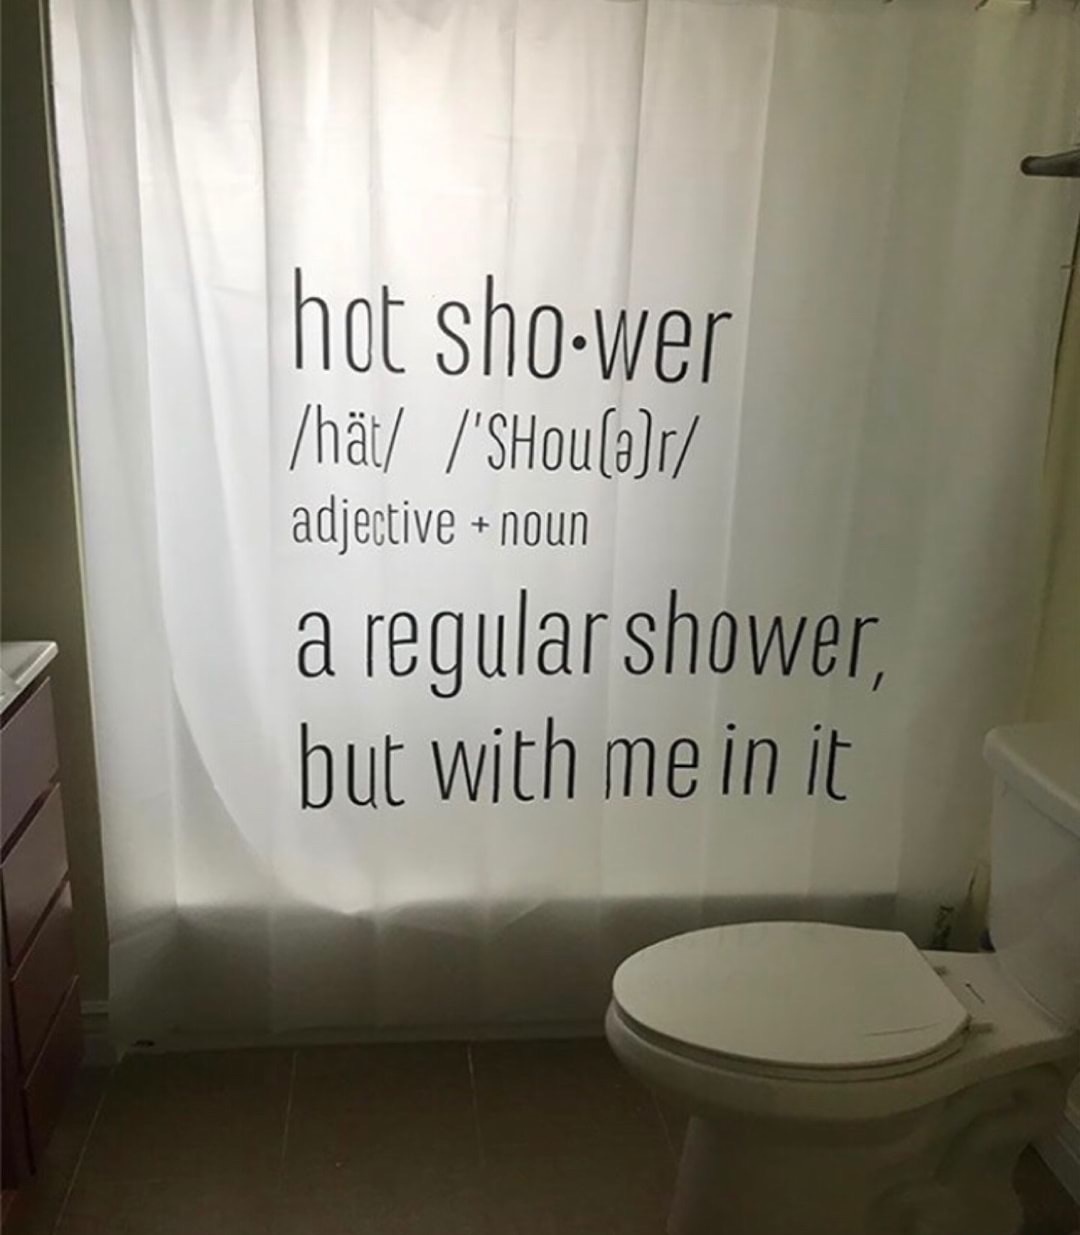 wall - hot shower ht 'SHouer adjective noun a regular shower, but with me in it